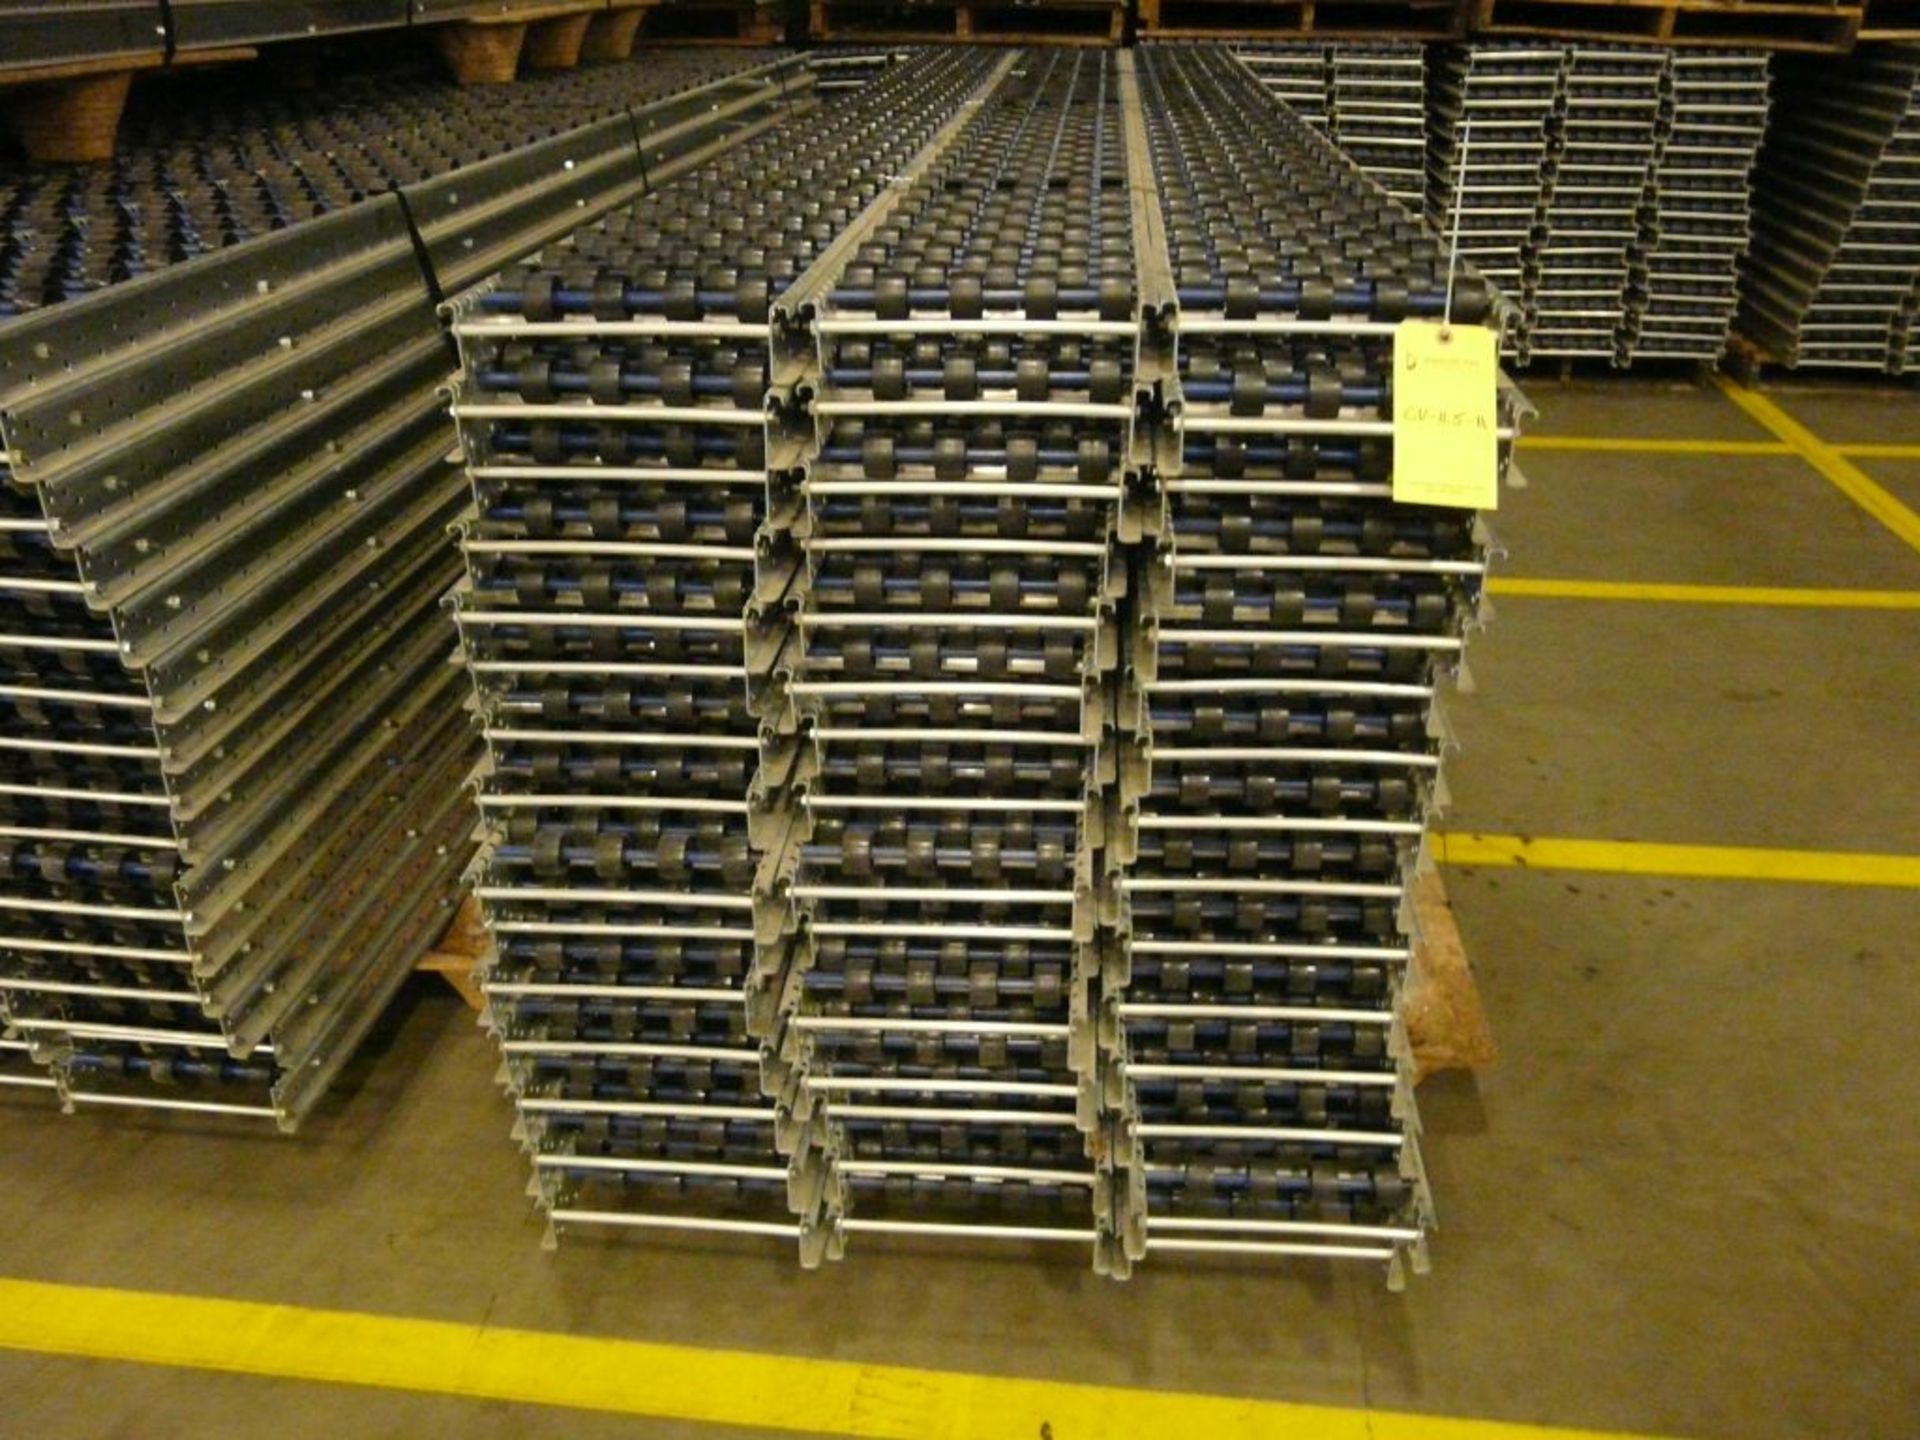 Lot of (90) SpanTrack Wheelbed Carton Flow Conveyors - 11.5'L x 11"W; Tag: 223573 - $30 Lot - Image 2 of 4